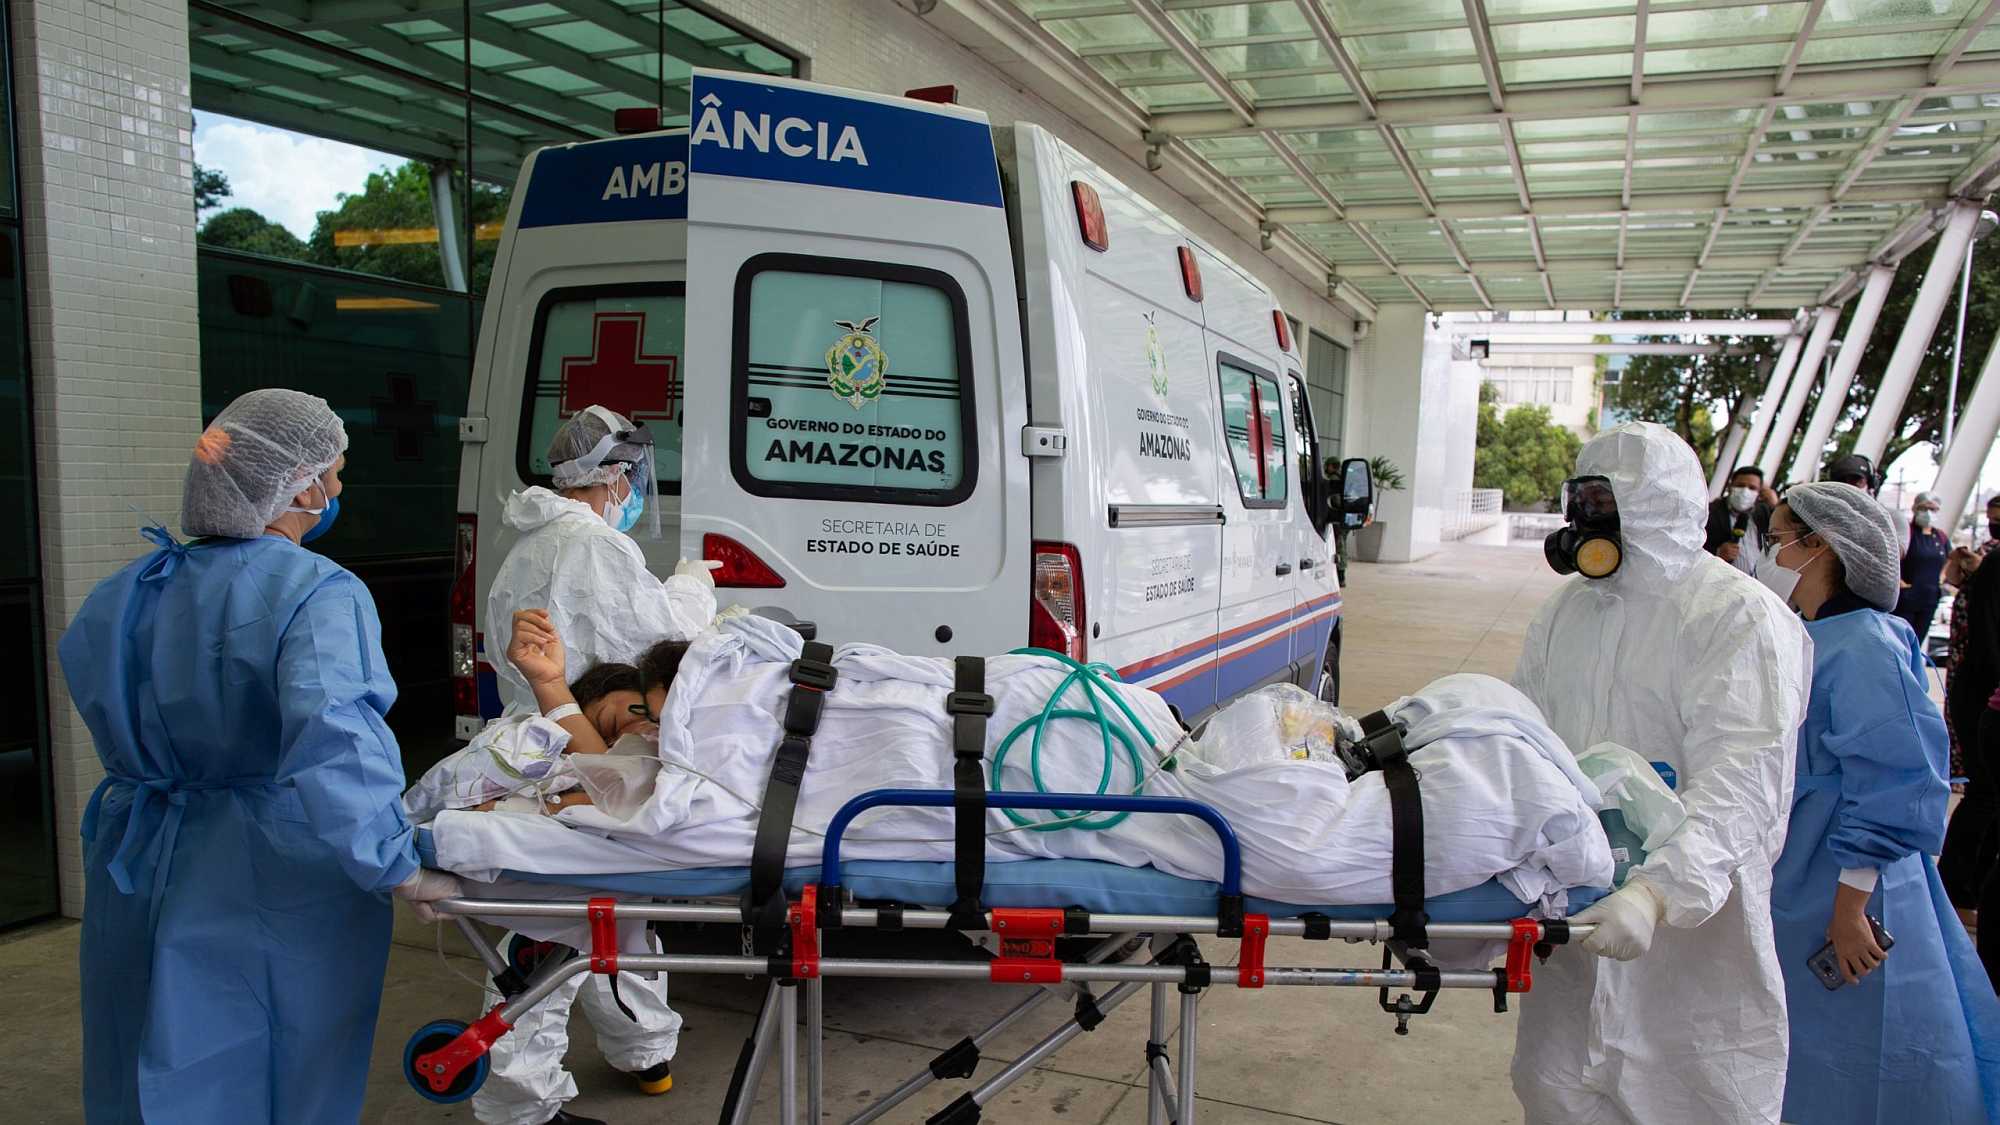 A patient gets to ambulance in Manaus, Brazil Amazonas state, which is short of oxygen